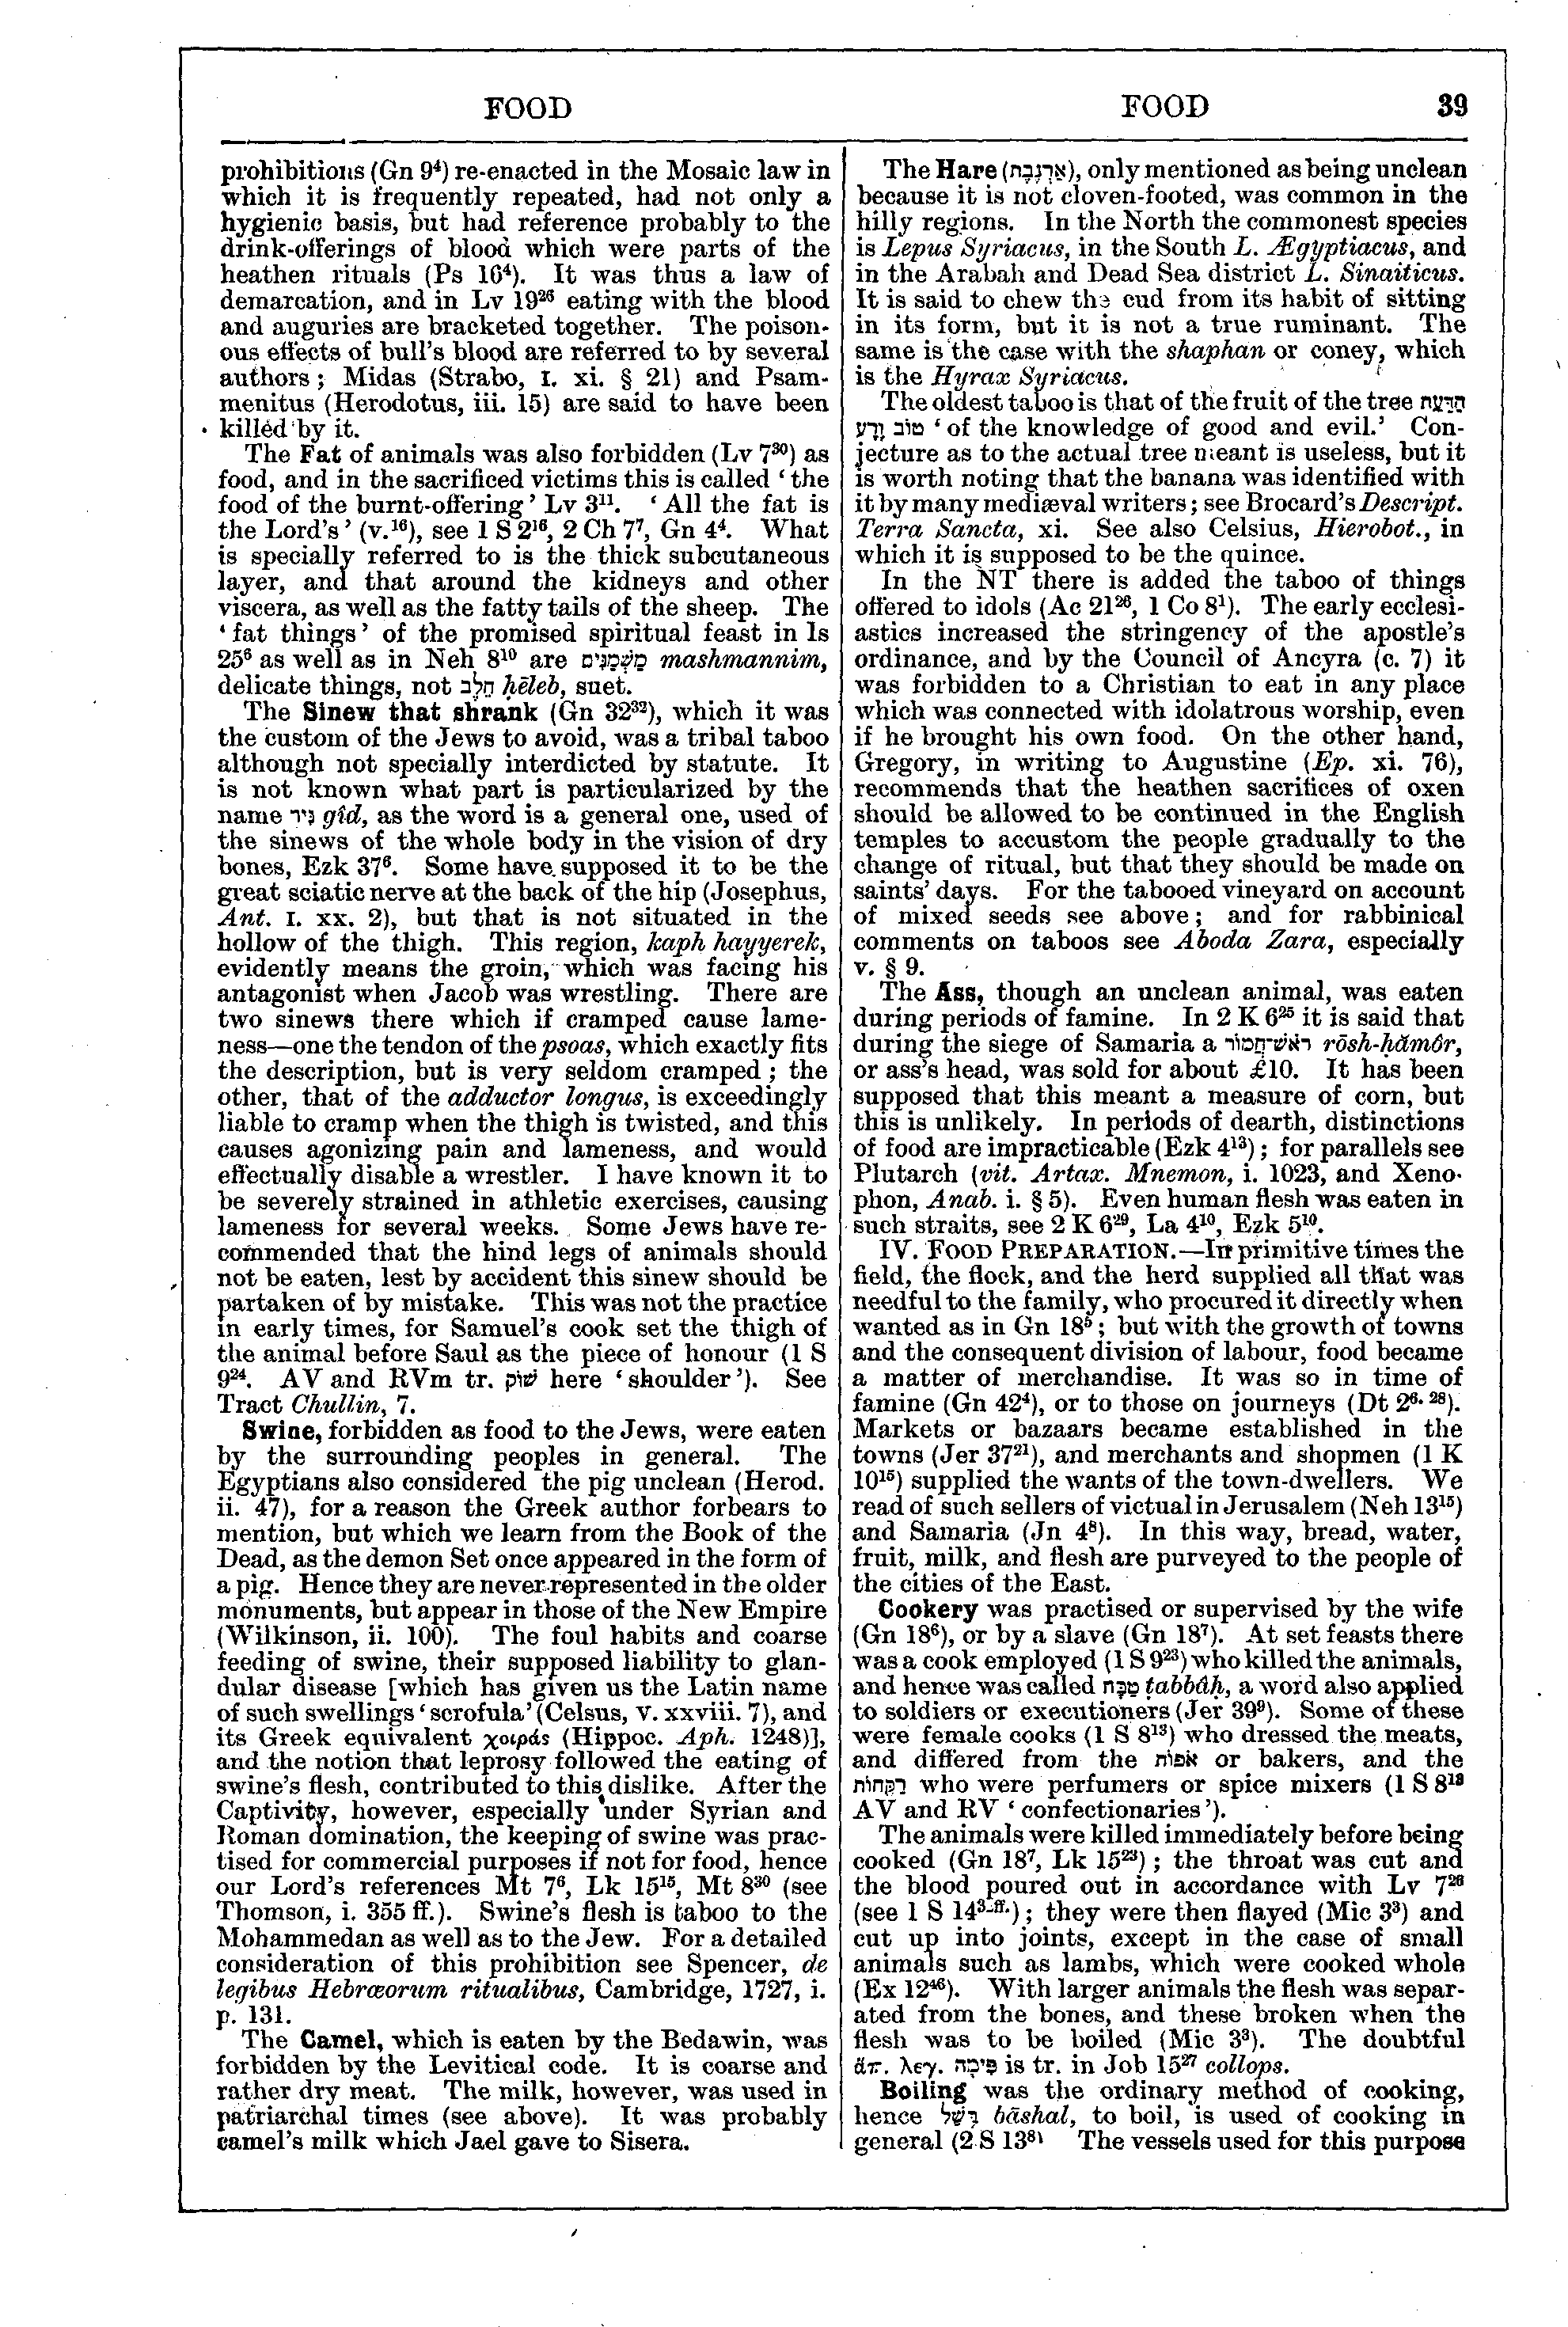 Image of page 39